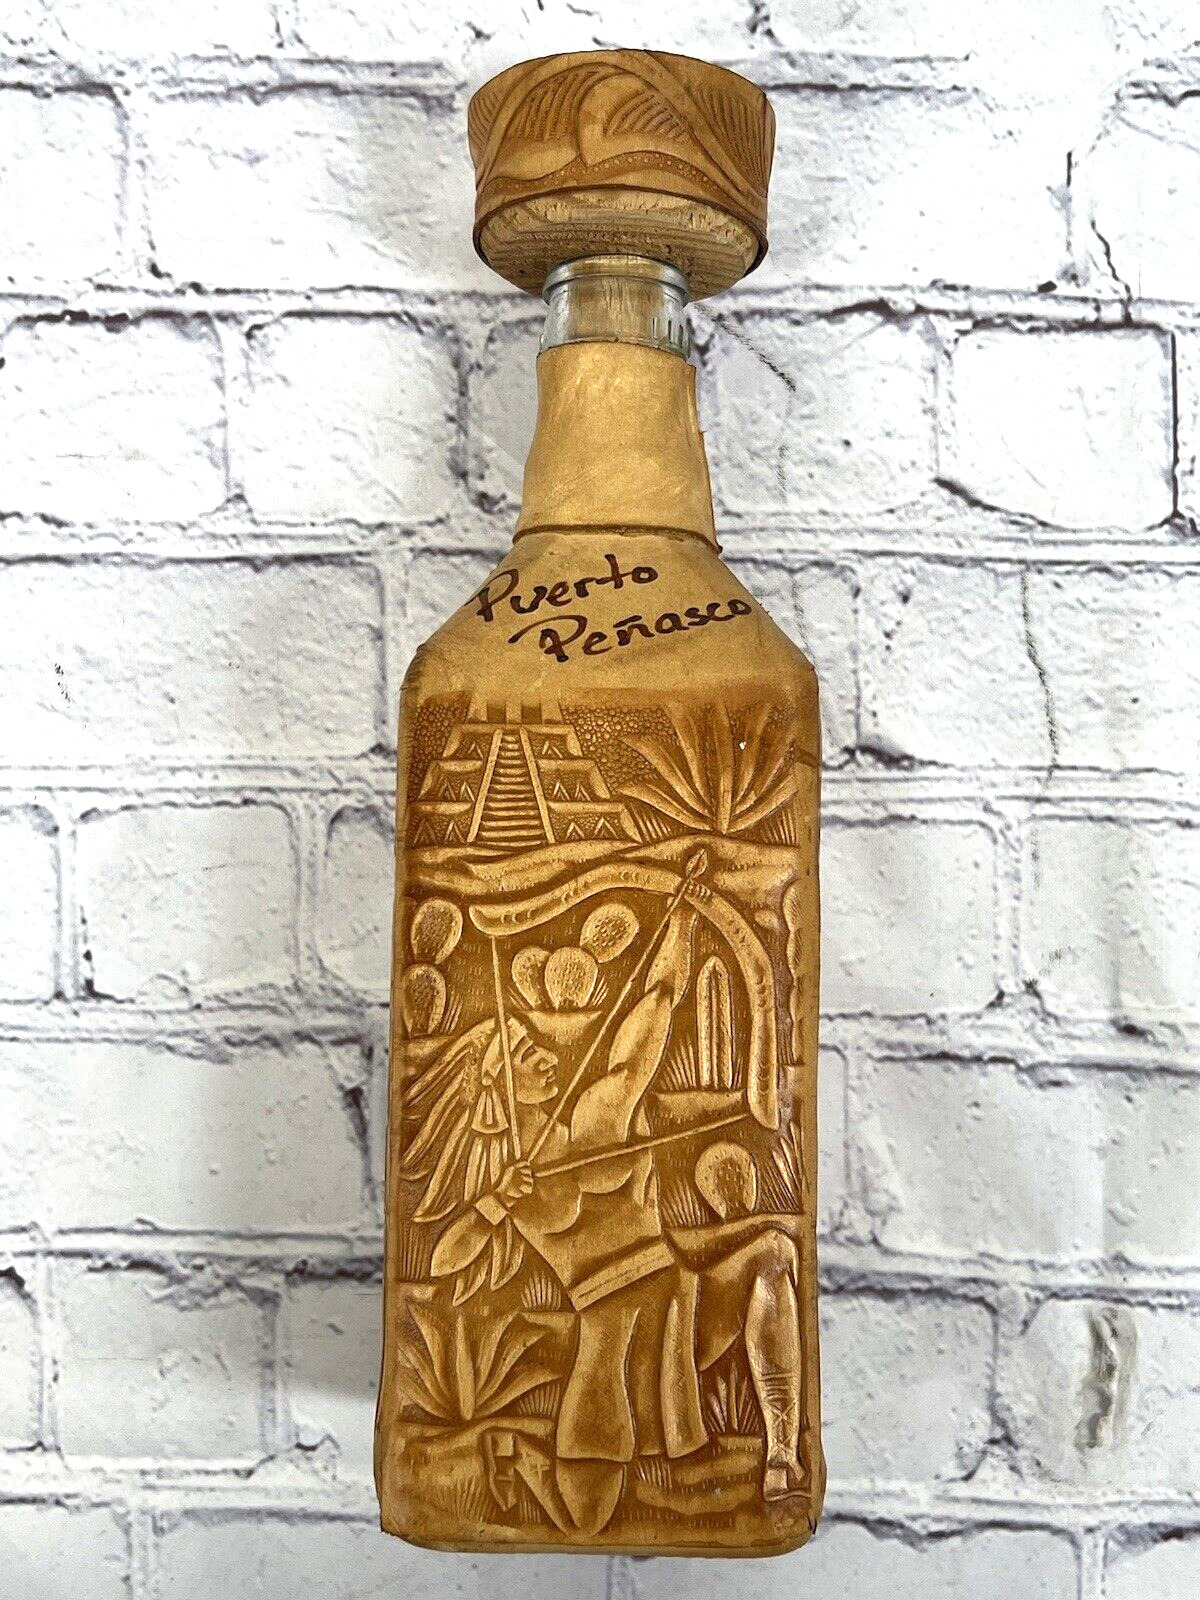 vintage Puert Penasco Mayan tooled leather decanter bottle collectable